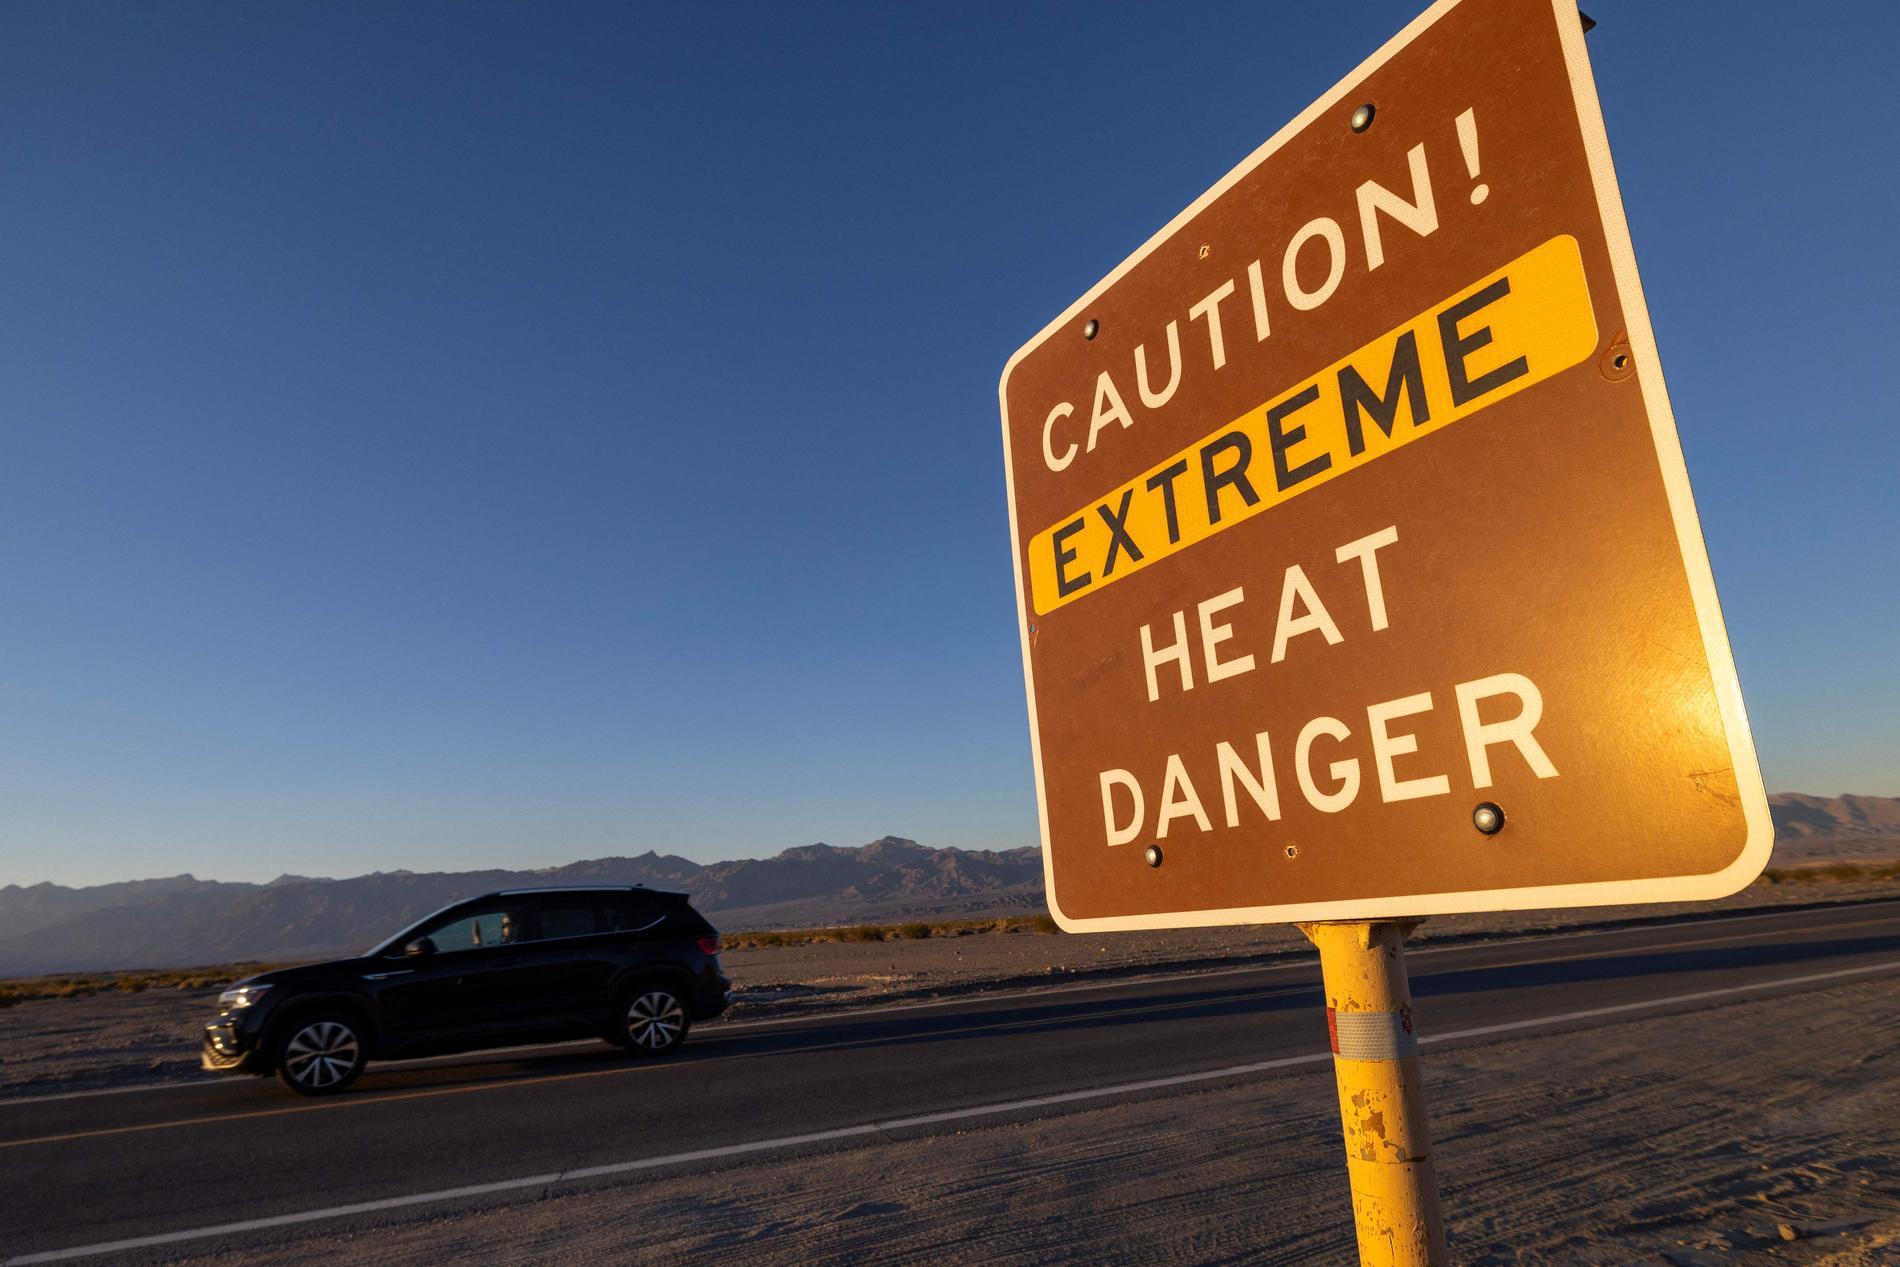 US Authorities Warn of Extreme Heat Danger in Death Valley, California as Temperature Gauge Hits Record High